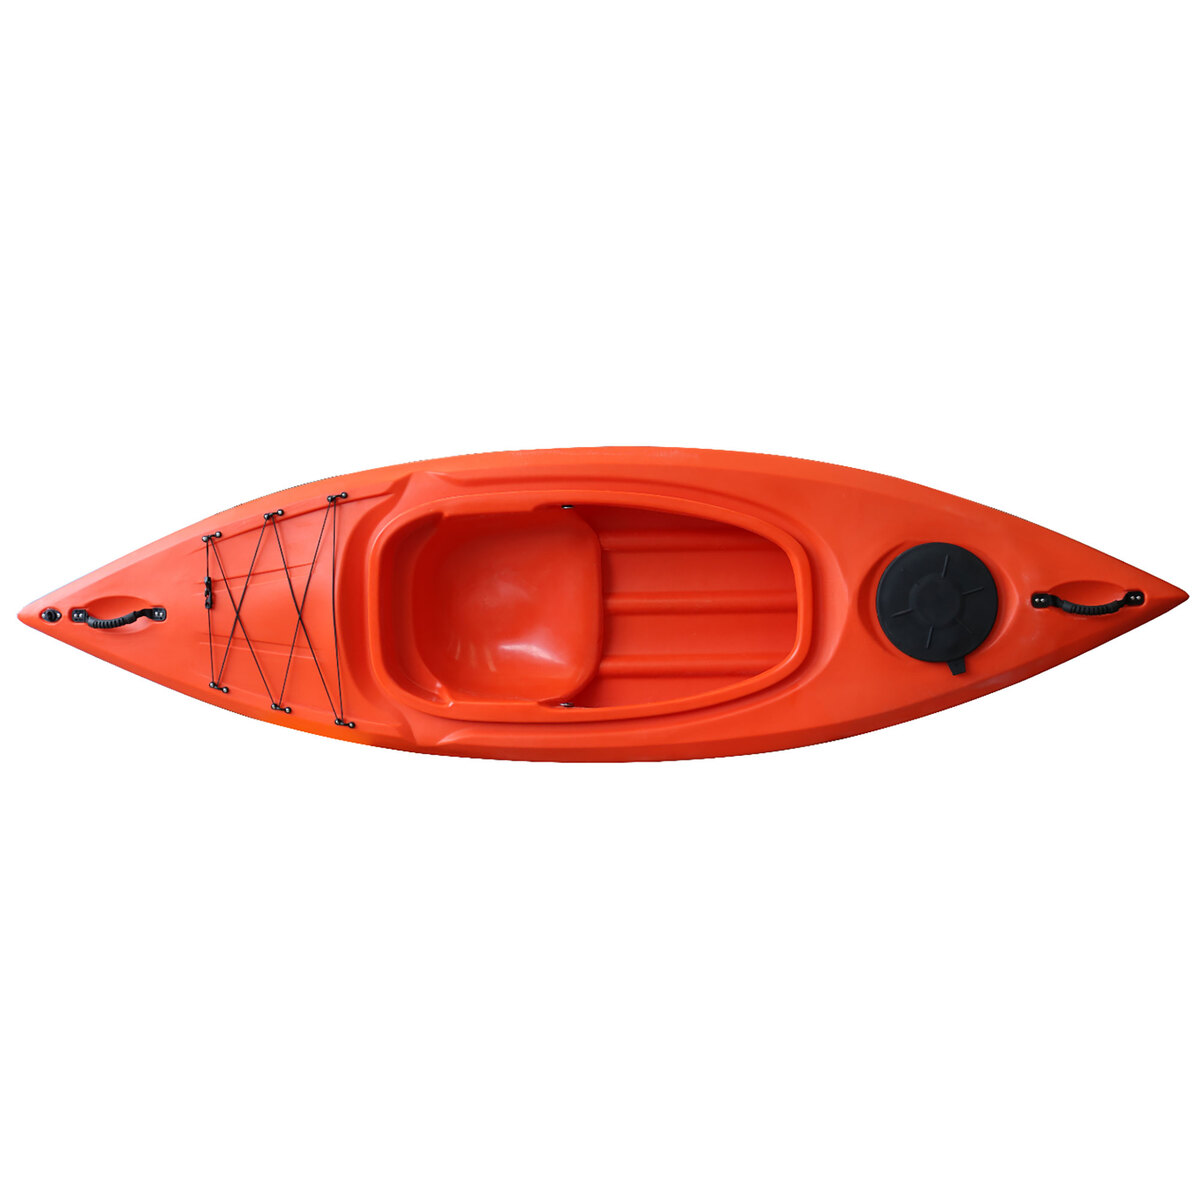 Skid Fusion Kayak 1-Person with Paddle VK-08 280x78x28cm